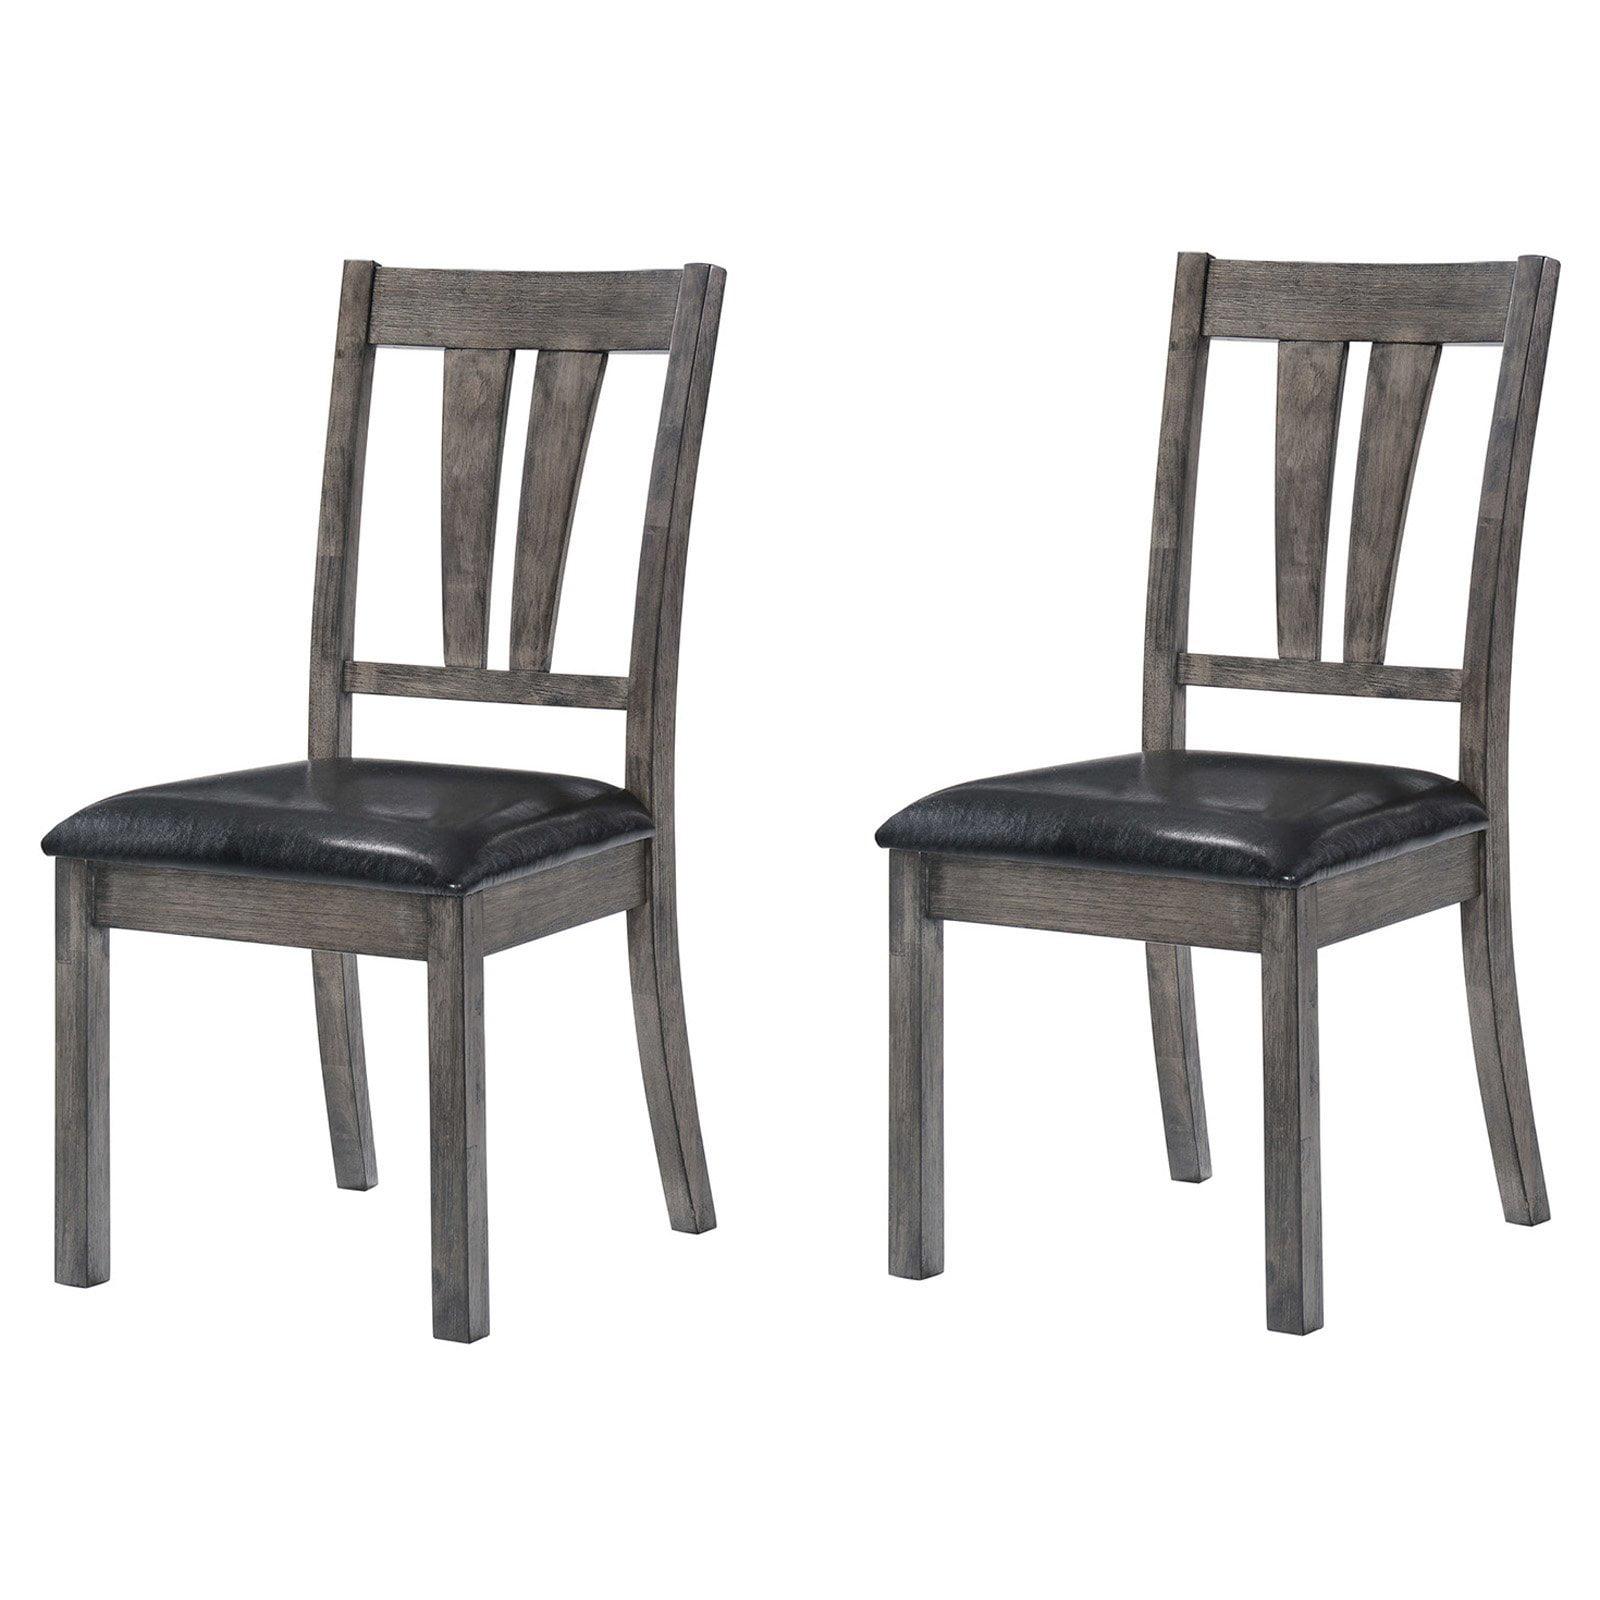 Rustic Grayson High-Back Faux Leather Side Chair in Grey Oak (Set of 2)